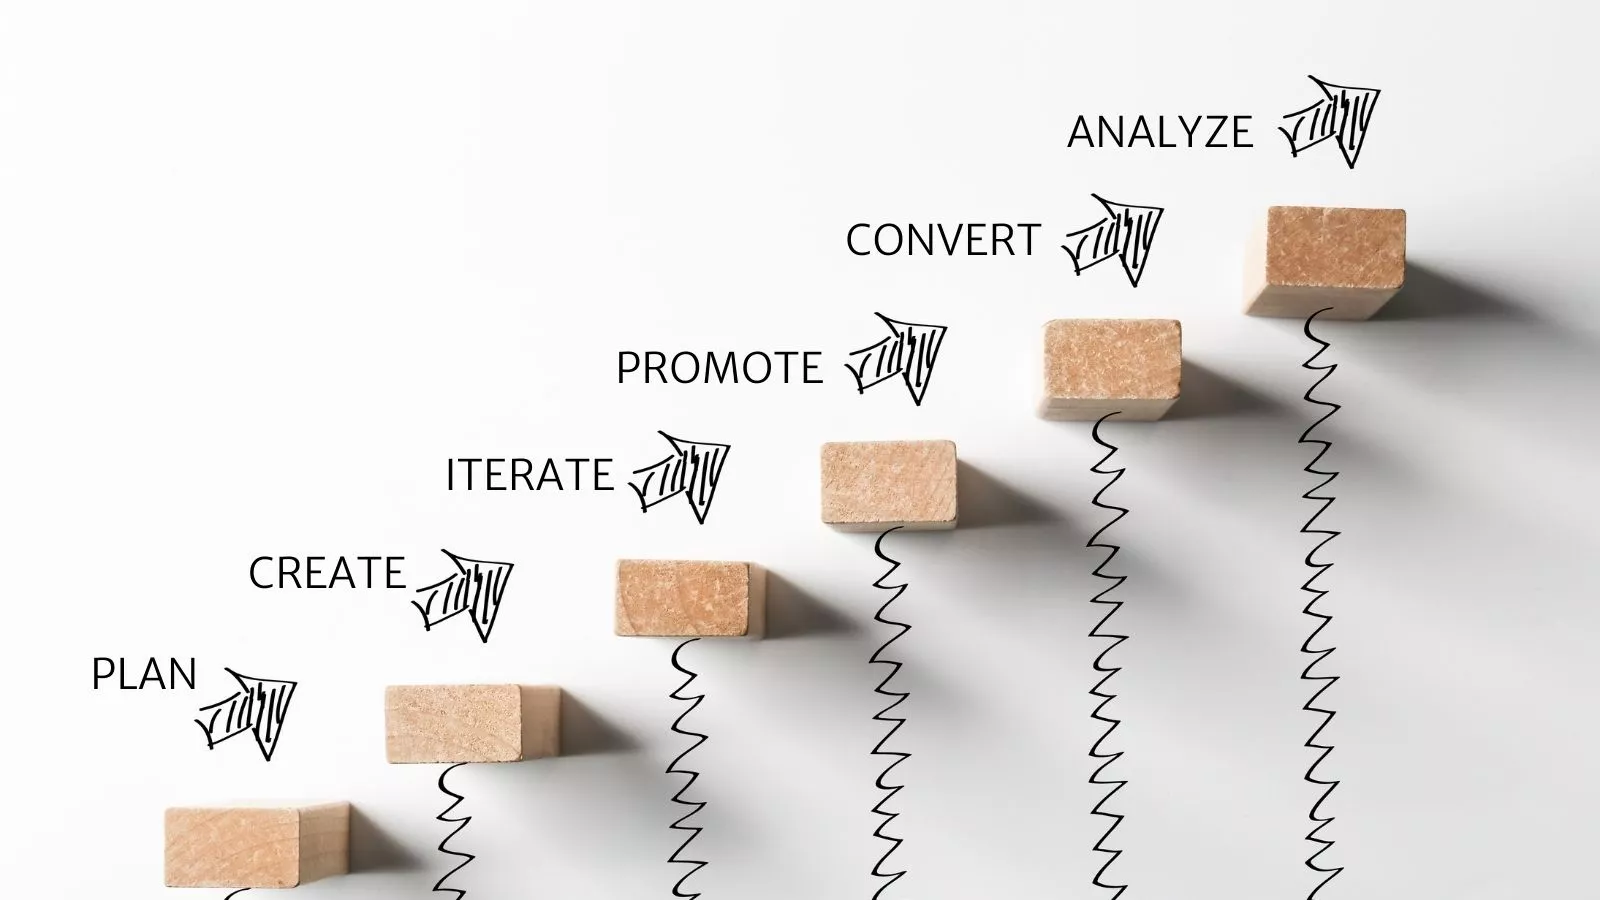 6 steps of content marketing plan  create iterate promote convert analyze